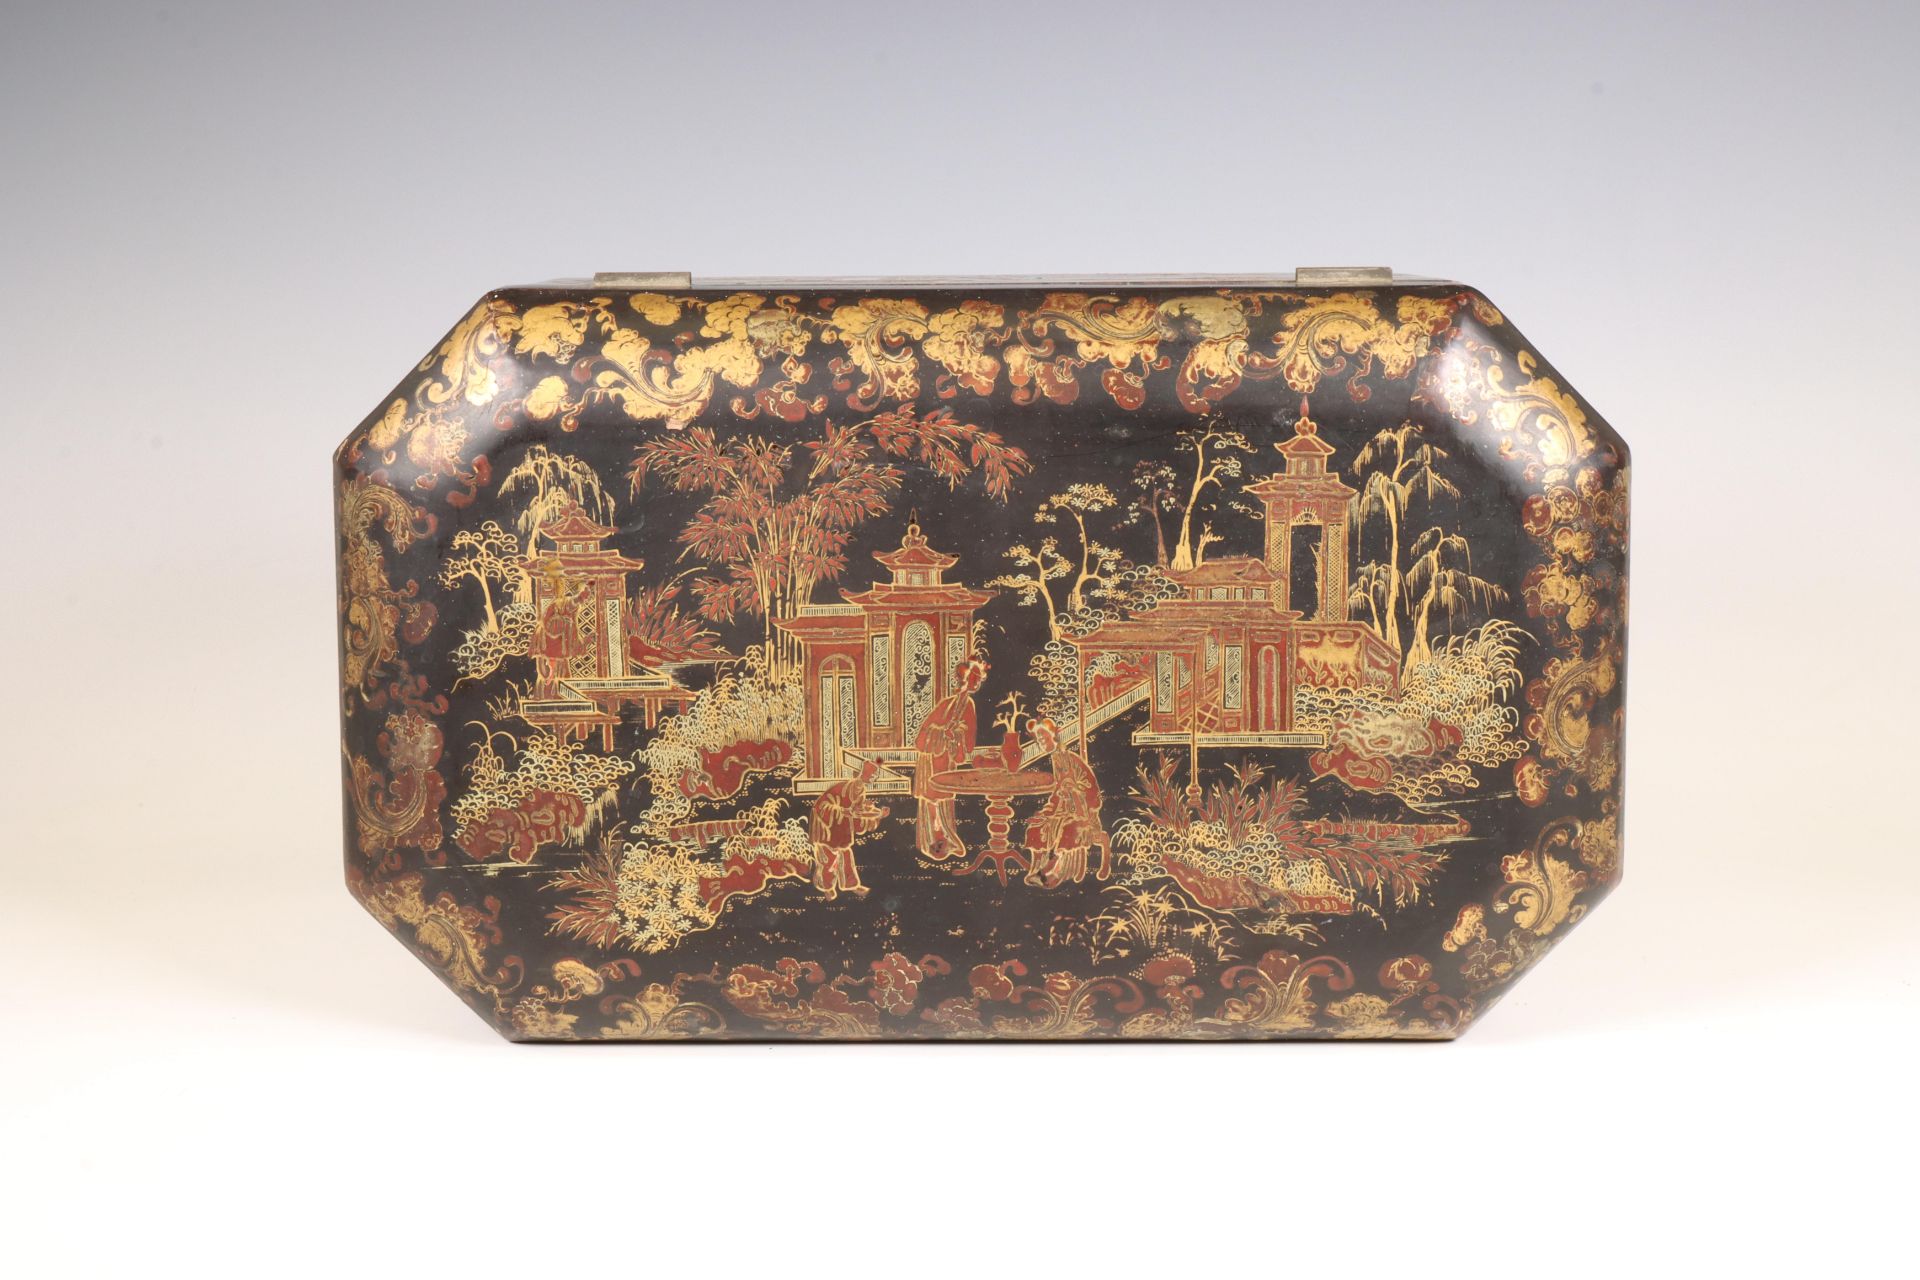 China, an export lacquer teabox lined with pewter caddies, 19th century, - Image 5 of 6